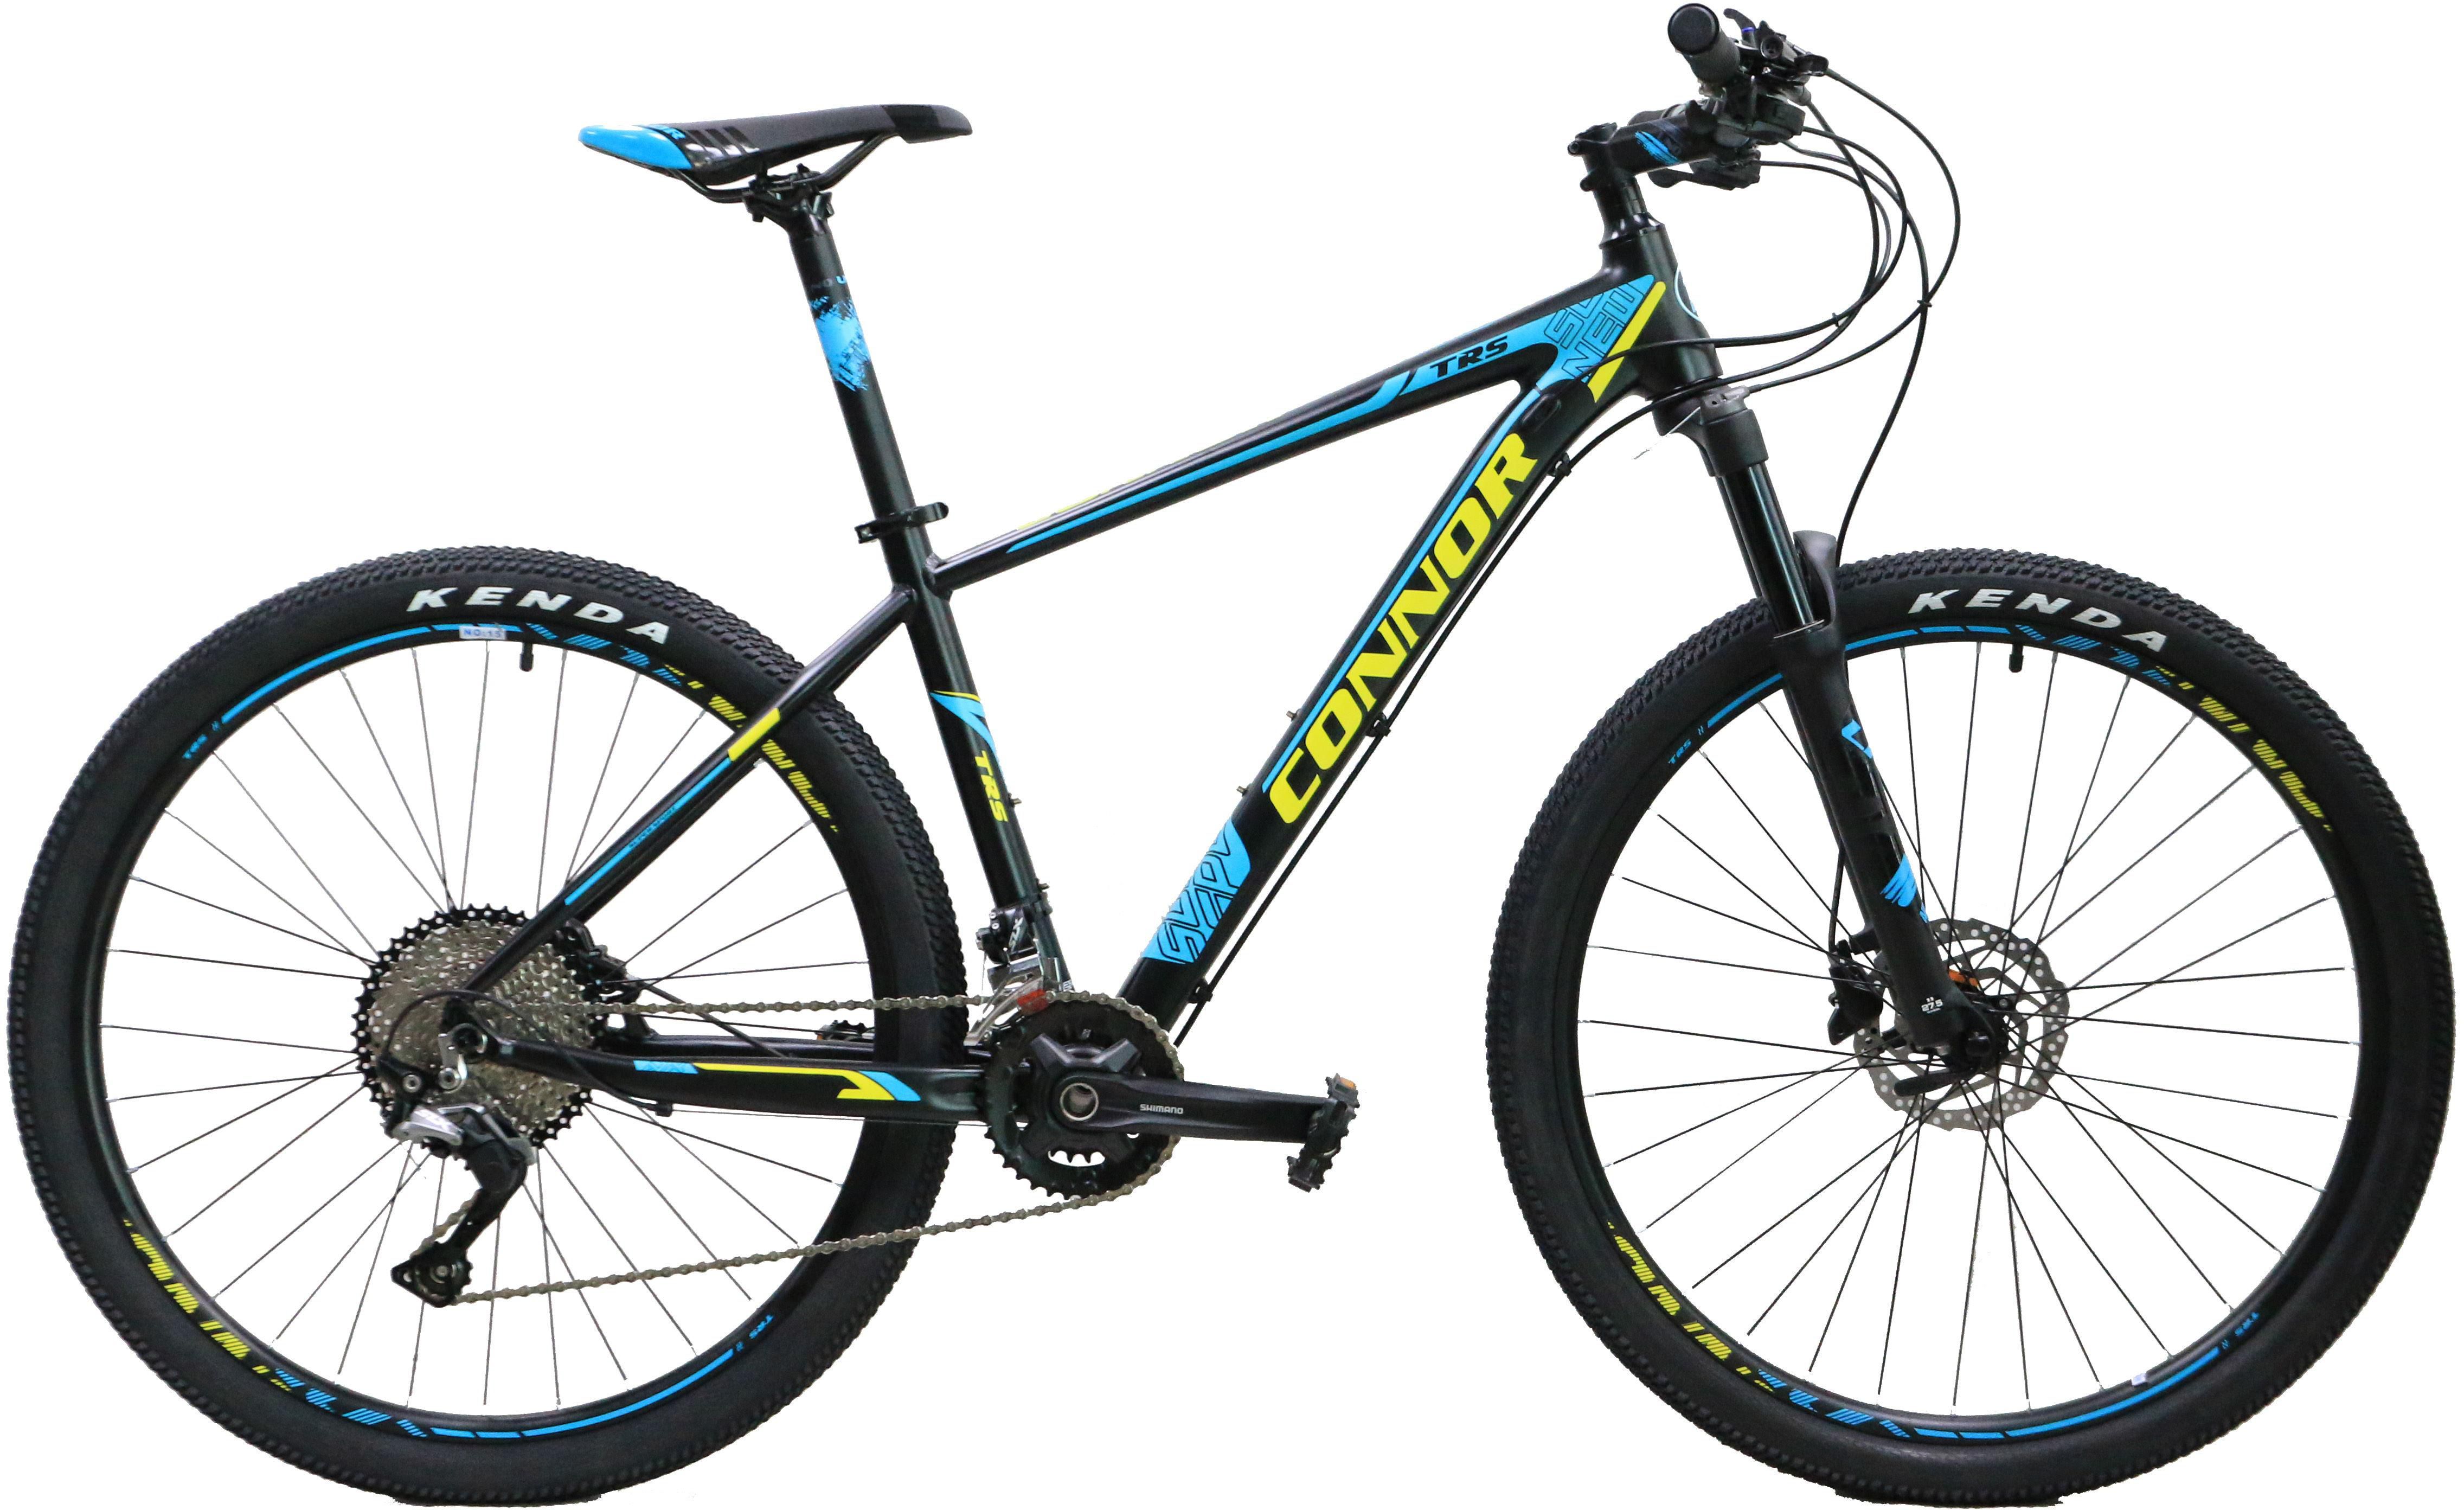 Trs Mountain Bike Connor 27.5 Inch 22 Speed – 2714 (3 Colors)